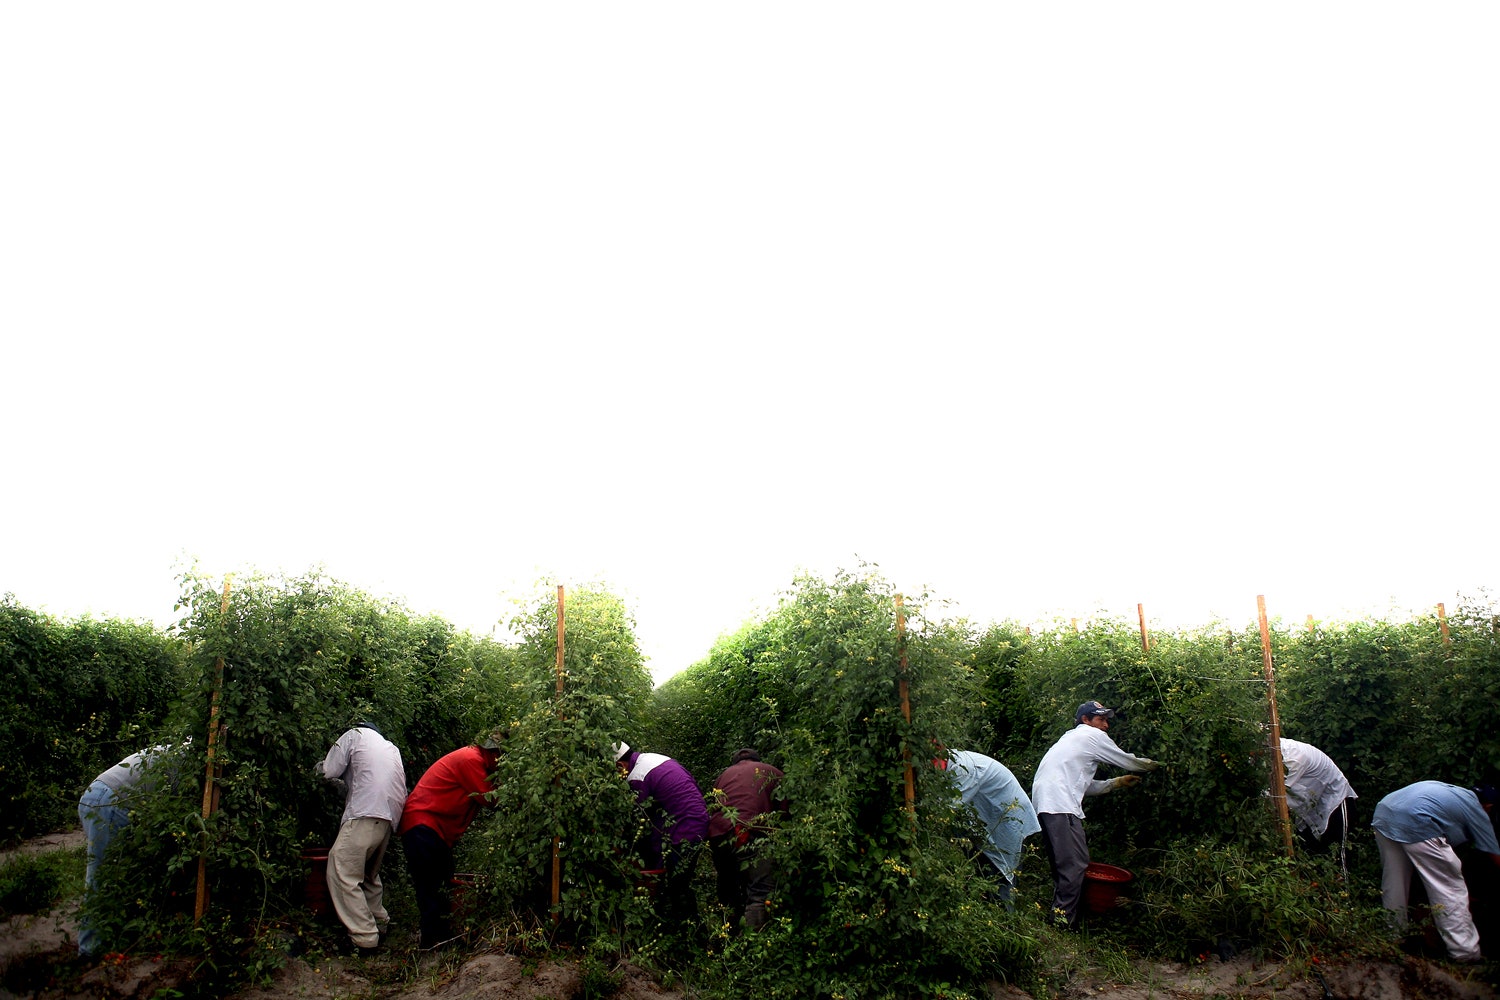 how many dominican immigrants in the united states are farm workers from the countryside